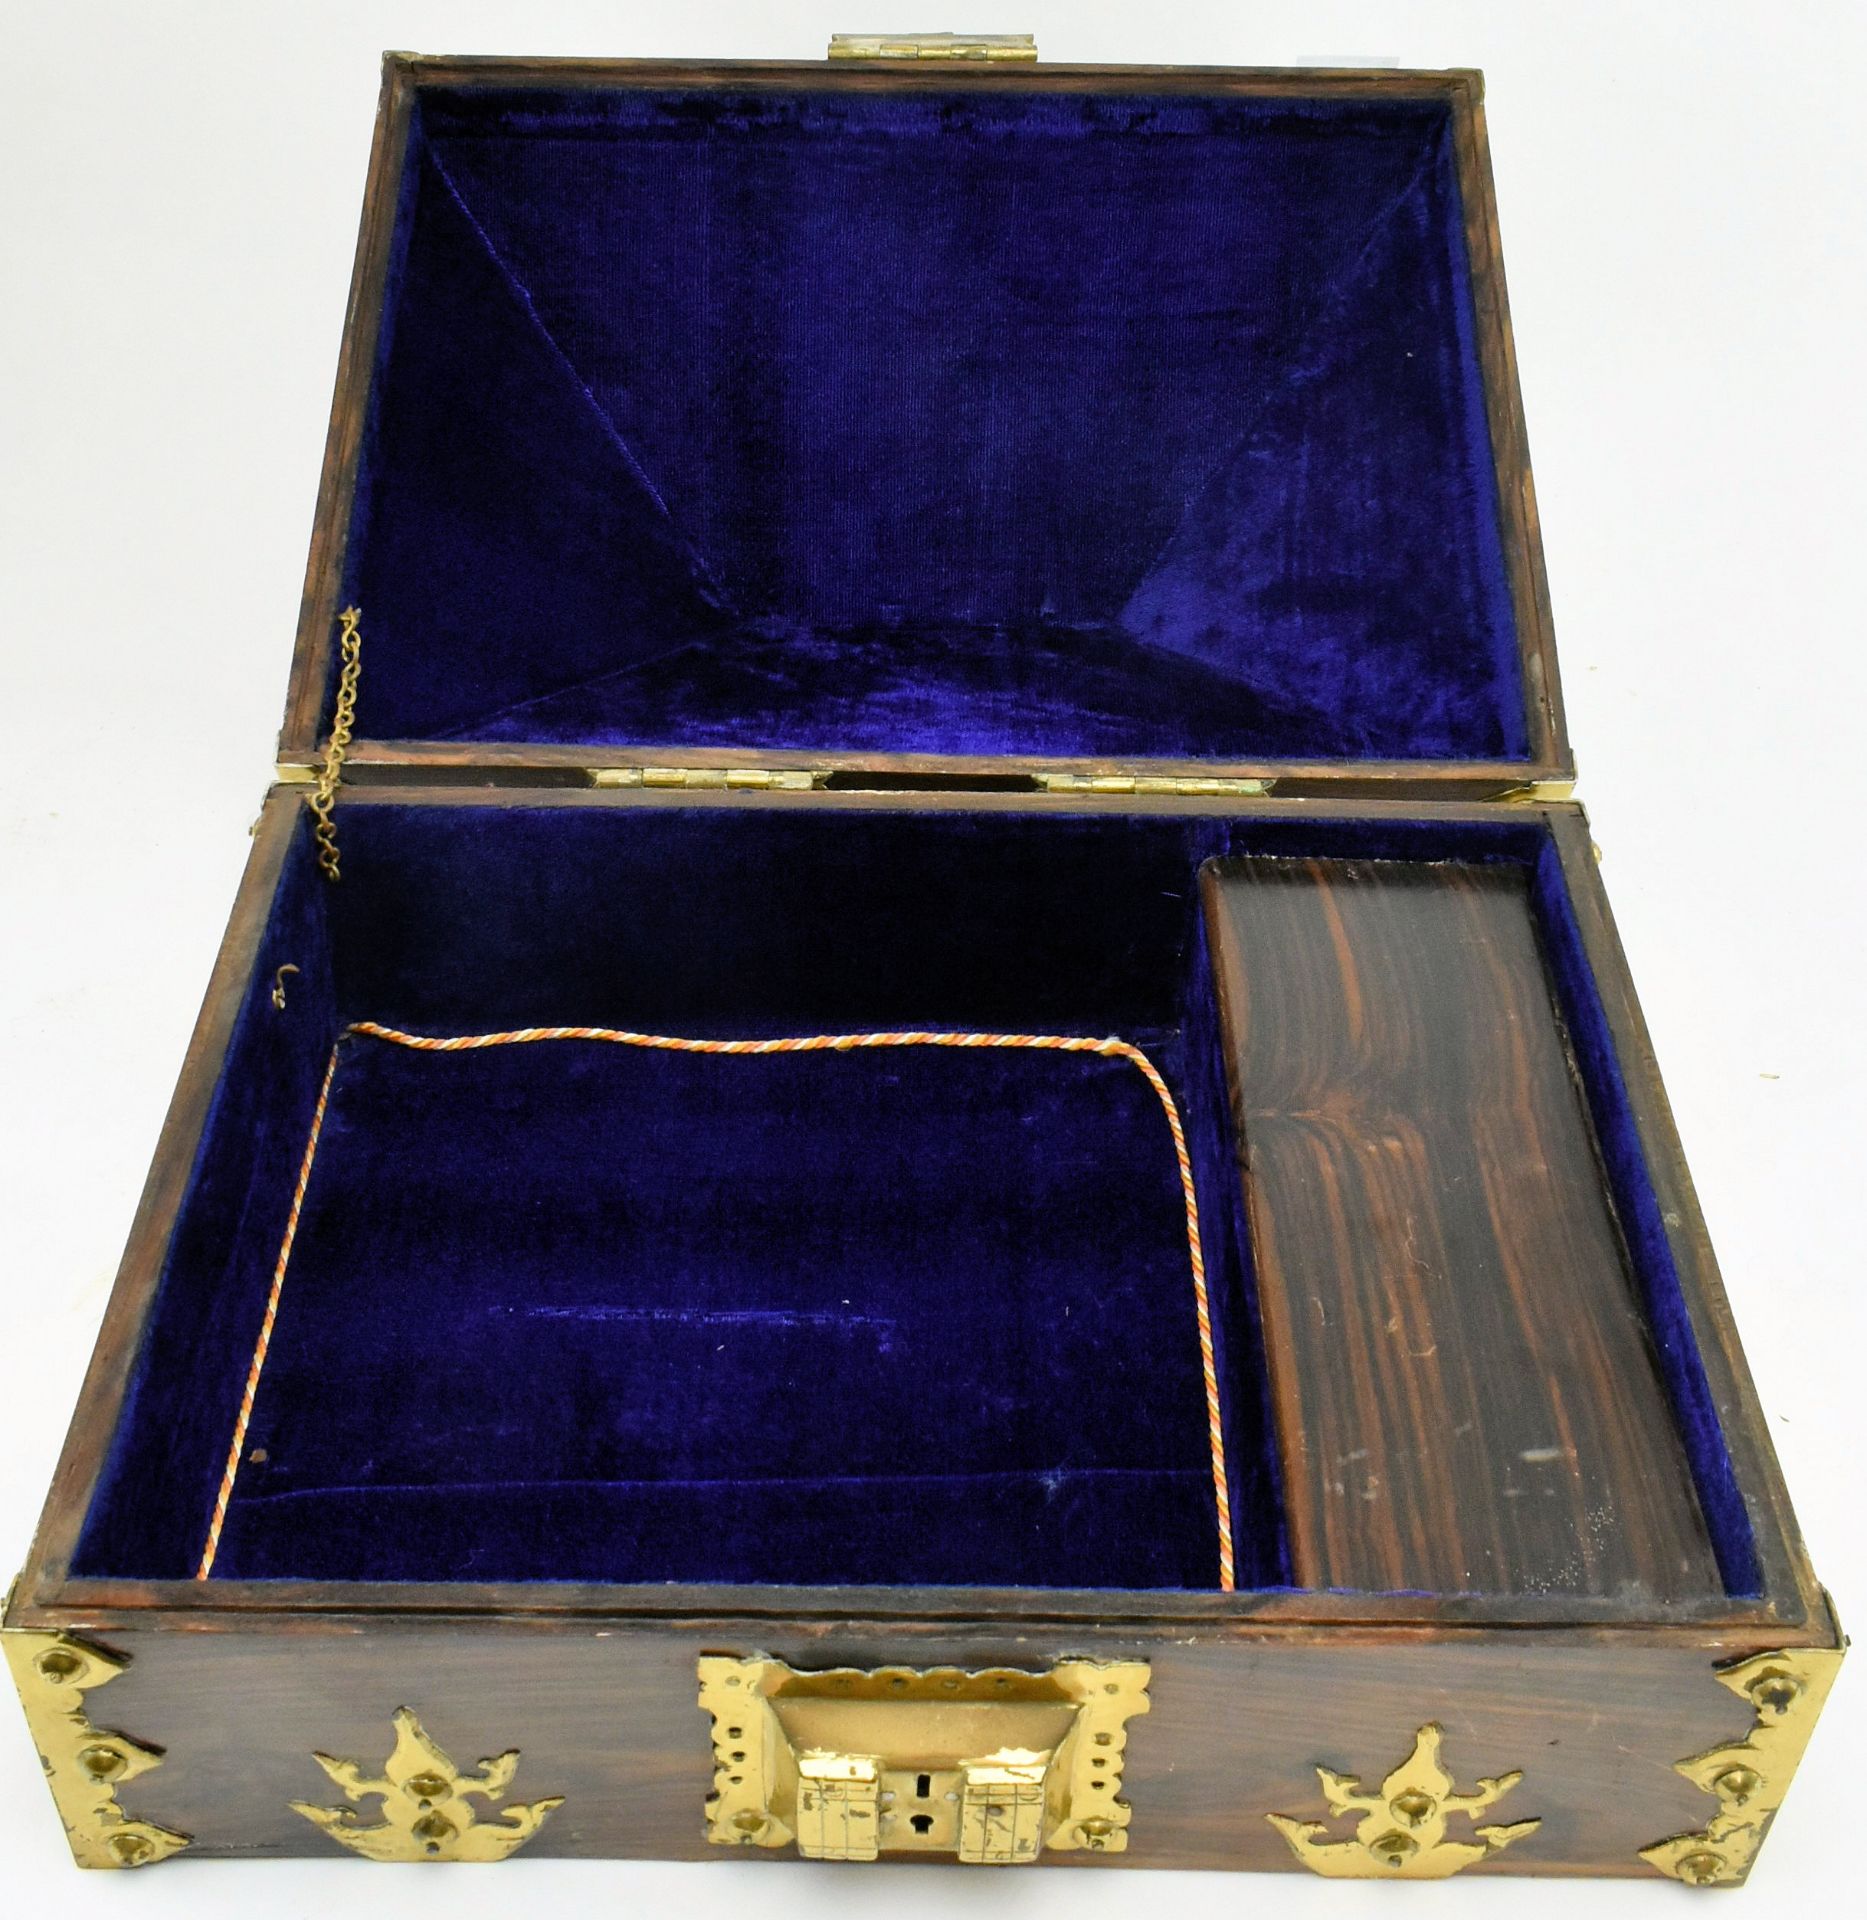 SOUTH INDIAN ROSEWOOD & GILDED METAL DOWRY BOX - Image 5 of 6